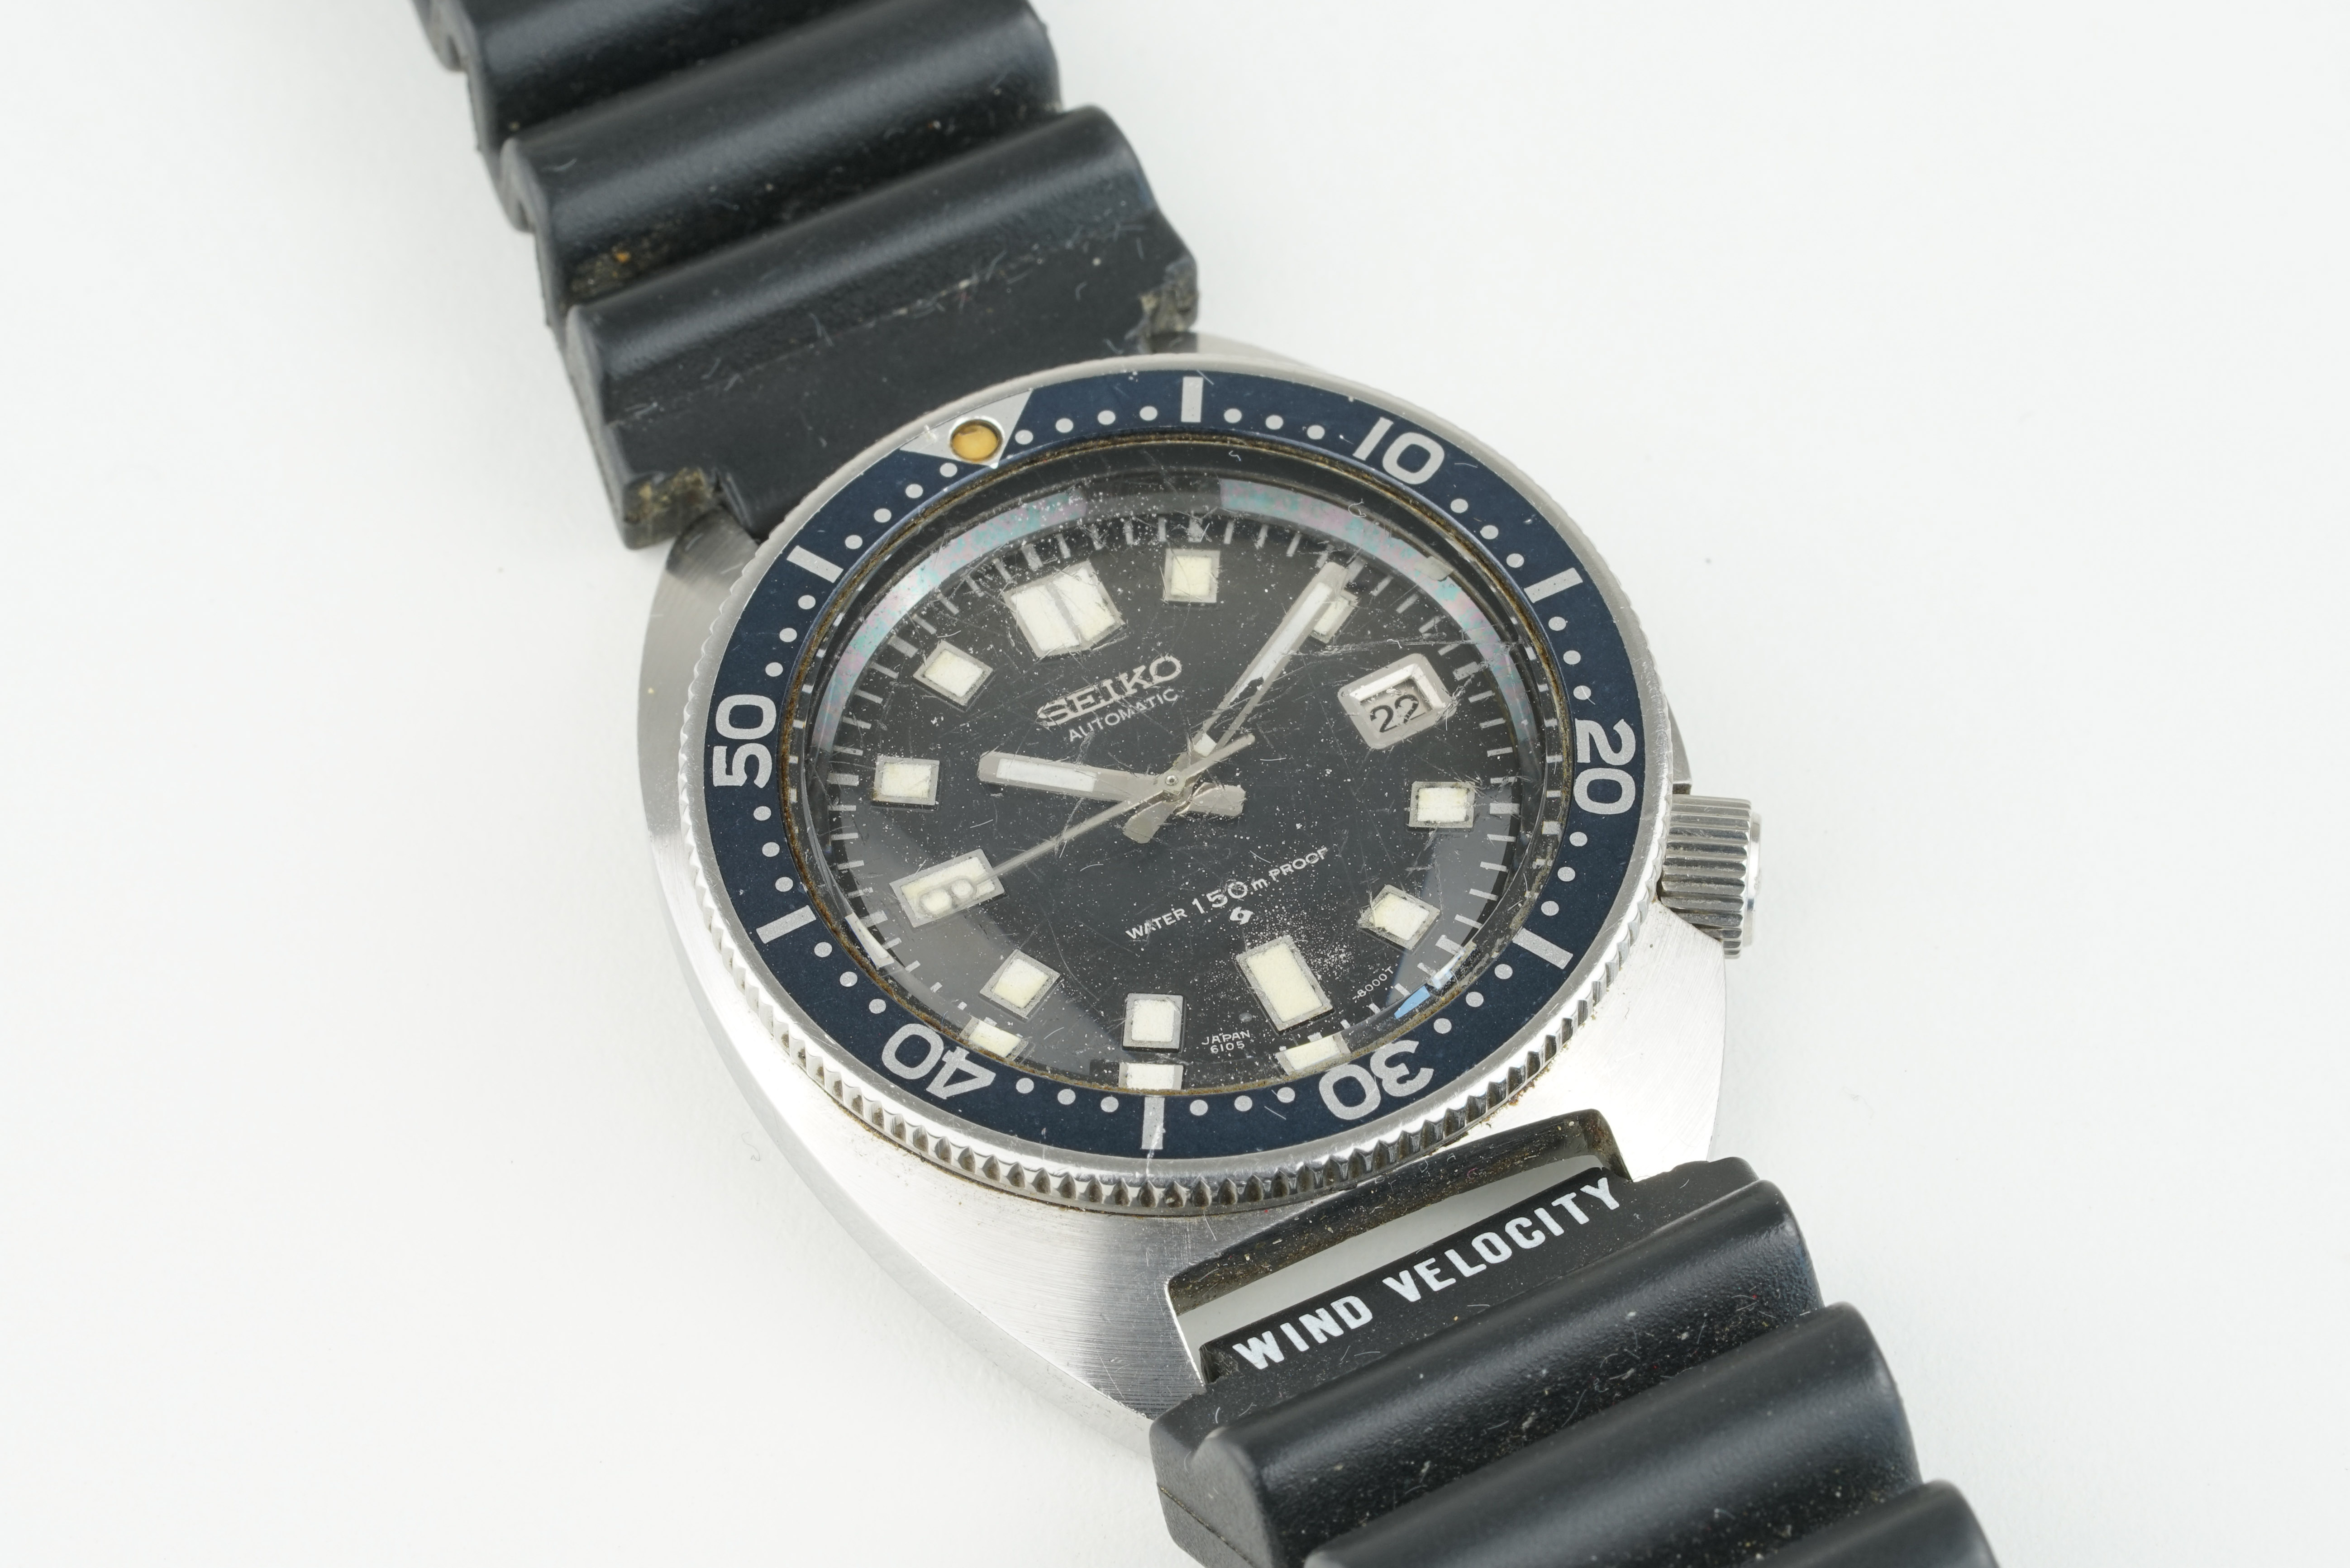 SEIKO AUTOMATIC DATE DIVER WRISTWATCH REF. 6105-8000, circular black dial with block hour markers